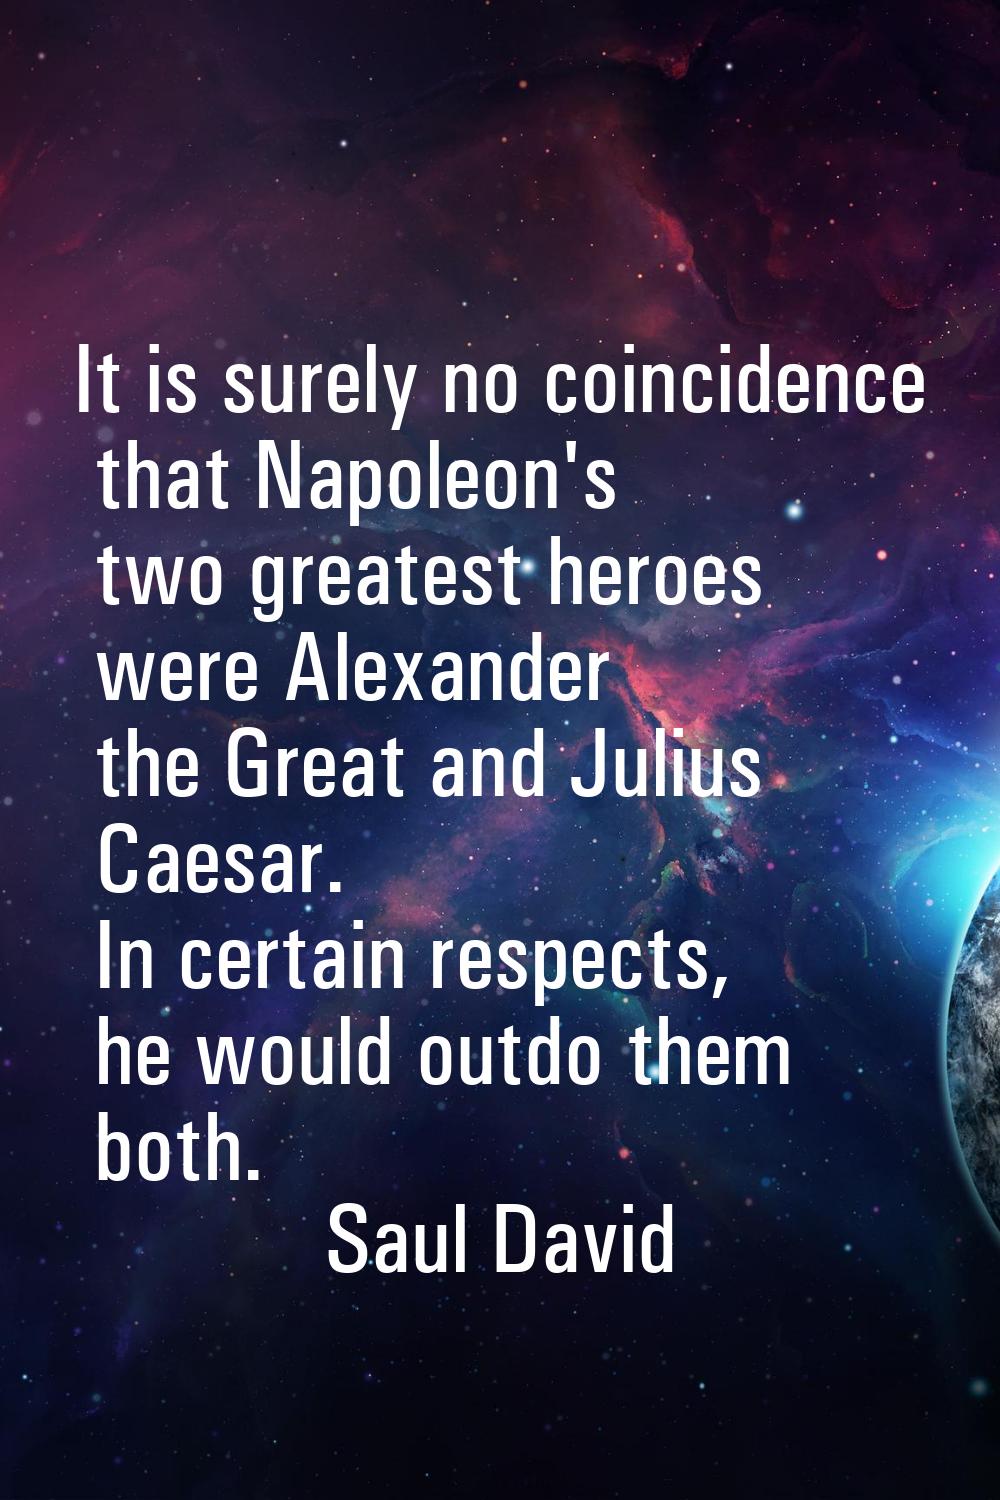 It is surely no coincidence that Napoleon's two greatest heroes were Alexander the Great and Julius